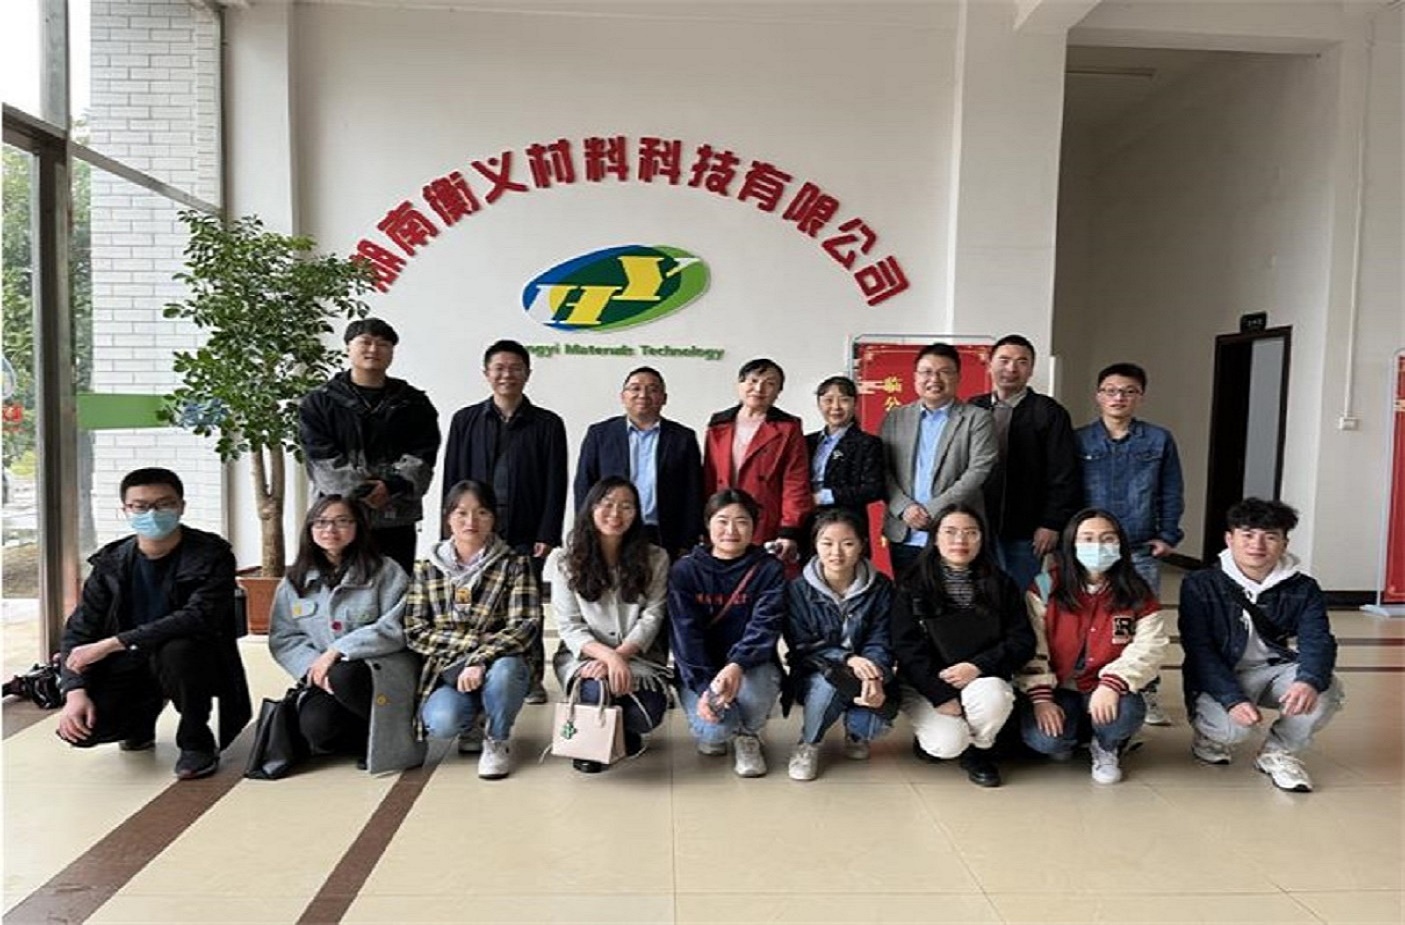 Carry out industry-university-research cooperation signing activities with Wuhan University of Technology